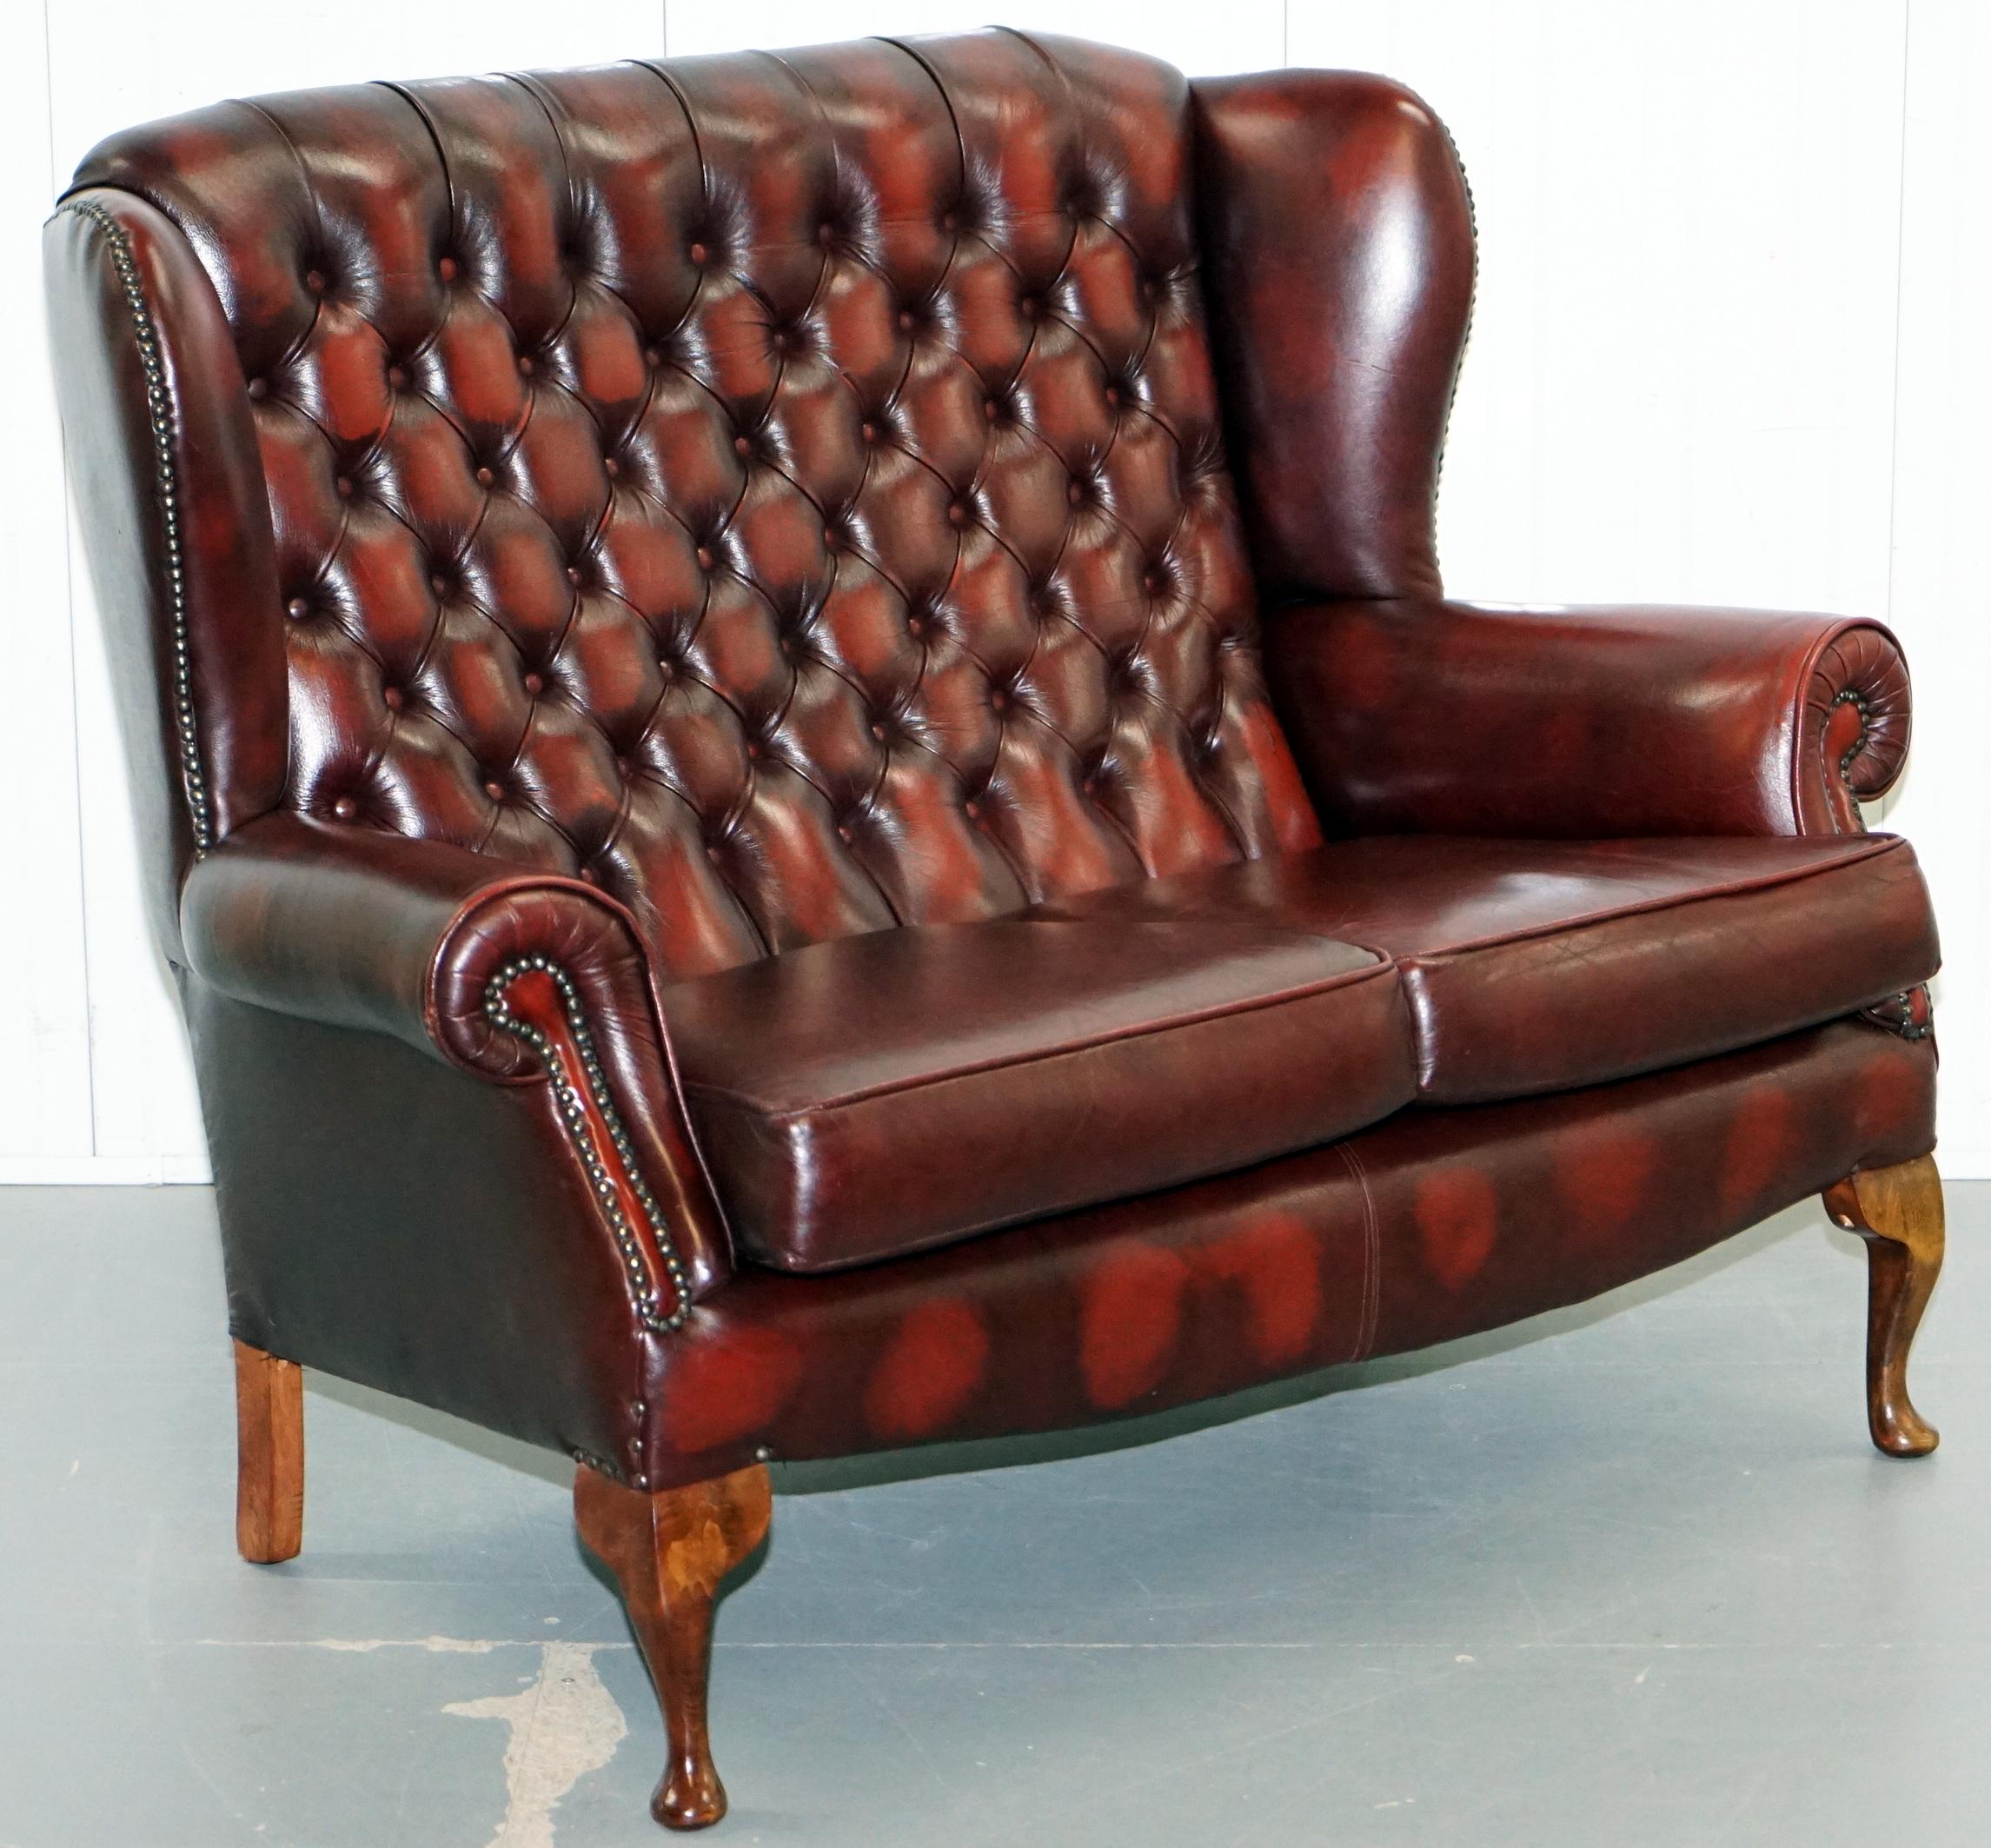 We are delighted to offer for sale this very nice hand dyed oxblood leather Chesterfield wingback two-seat bench sofa

This piece is in lightly restored condition to include a deep clean hand condition wax and hand